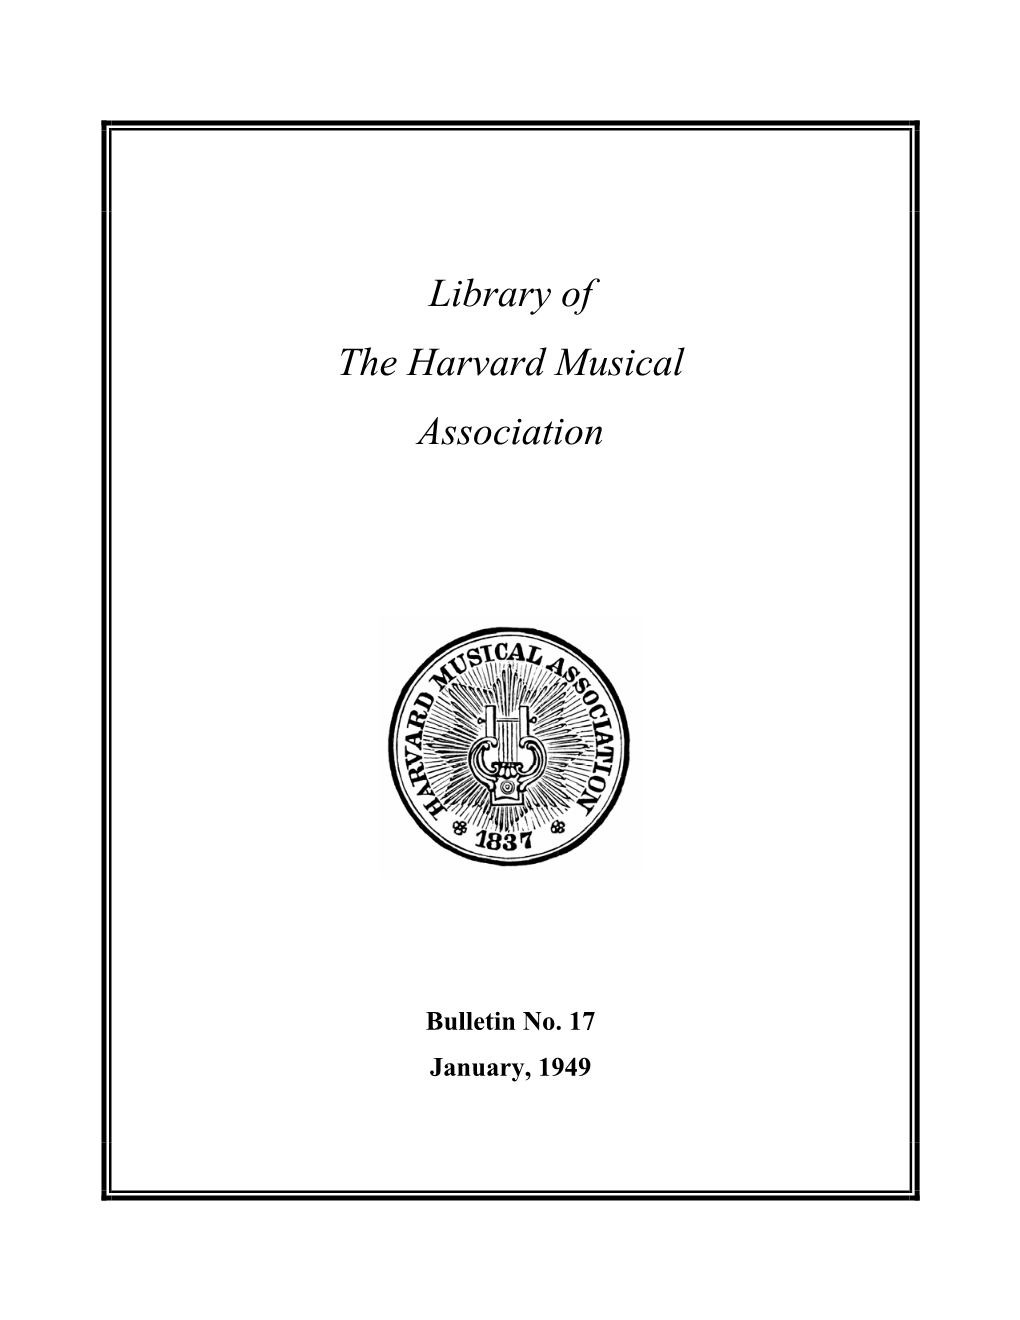 Library of the Harvard Musical Association